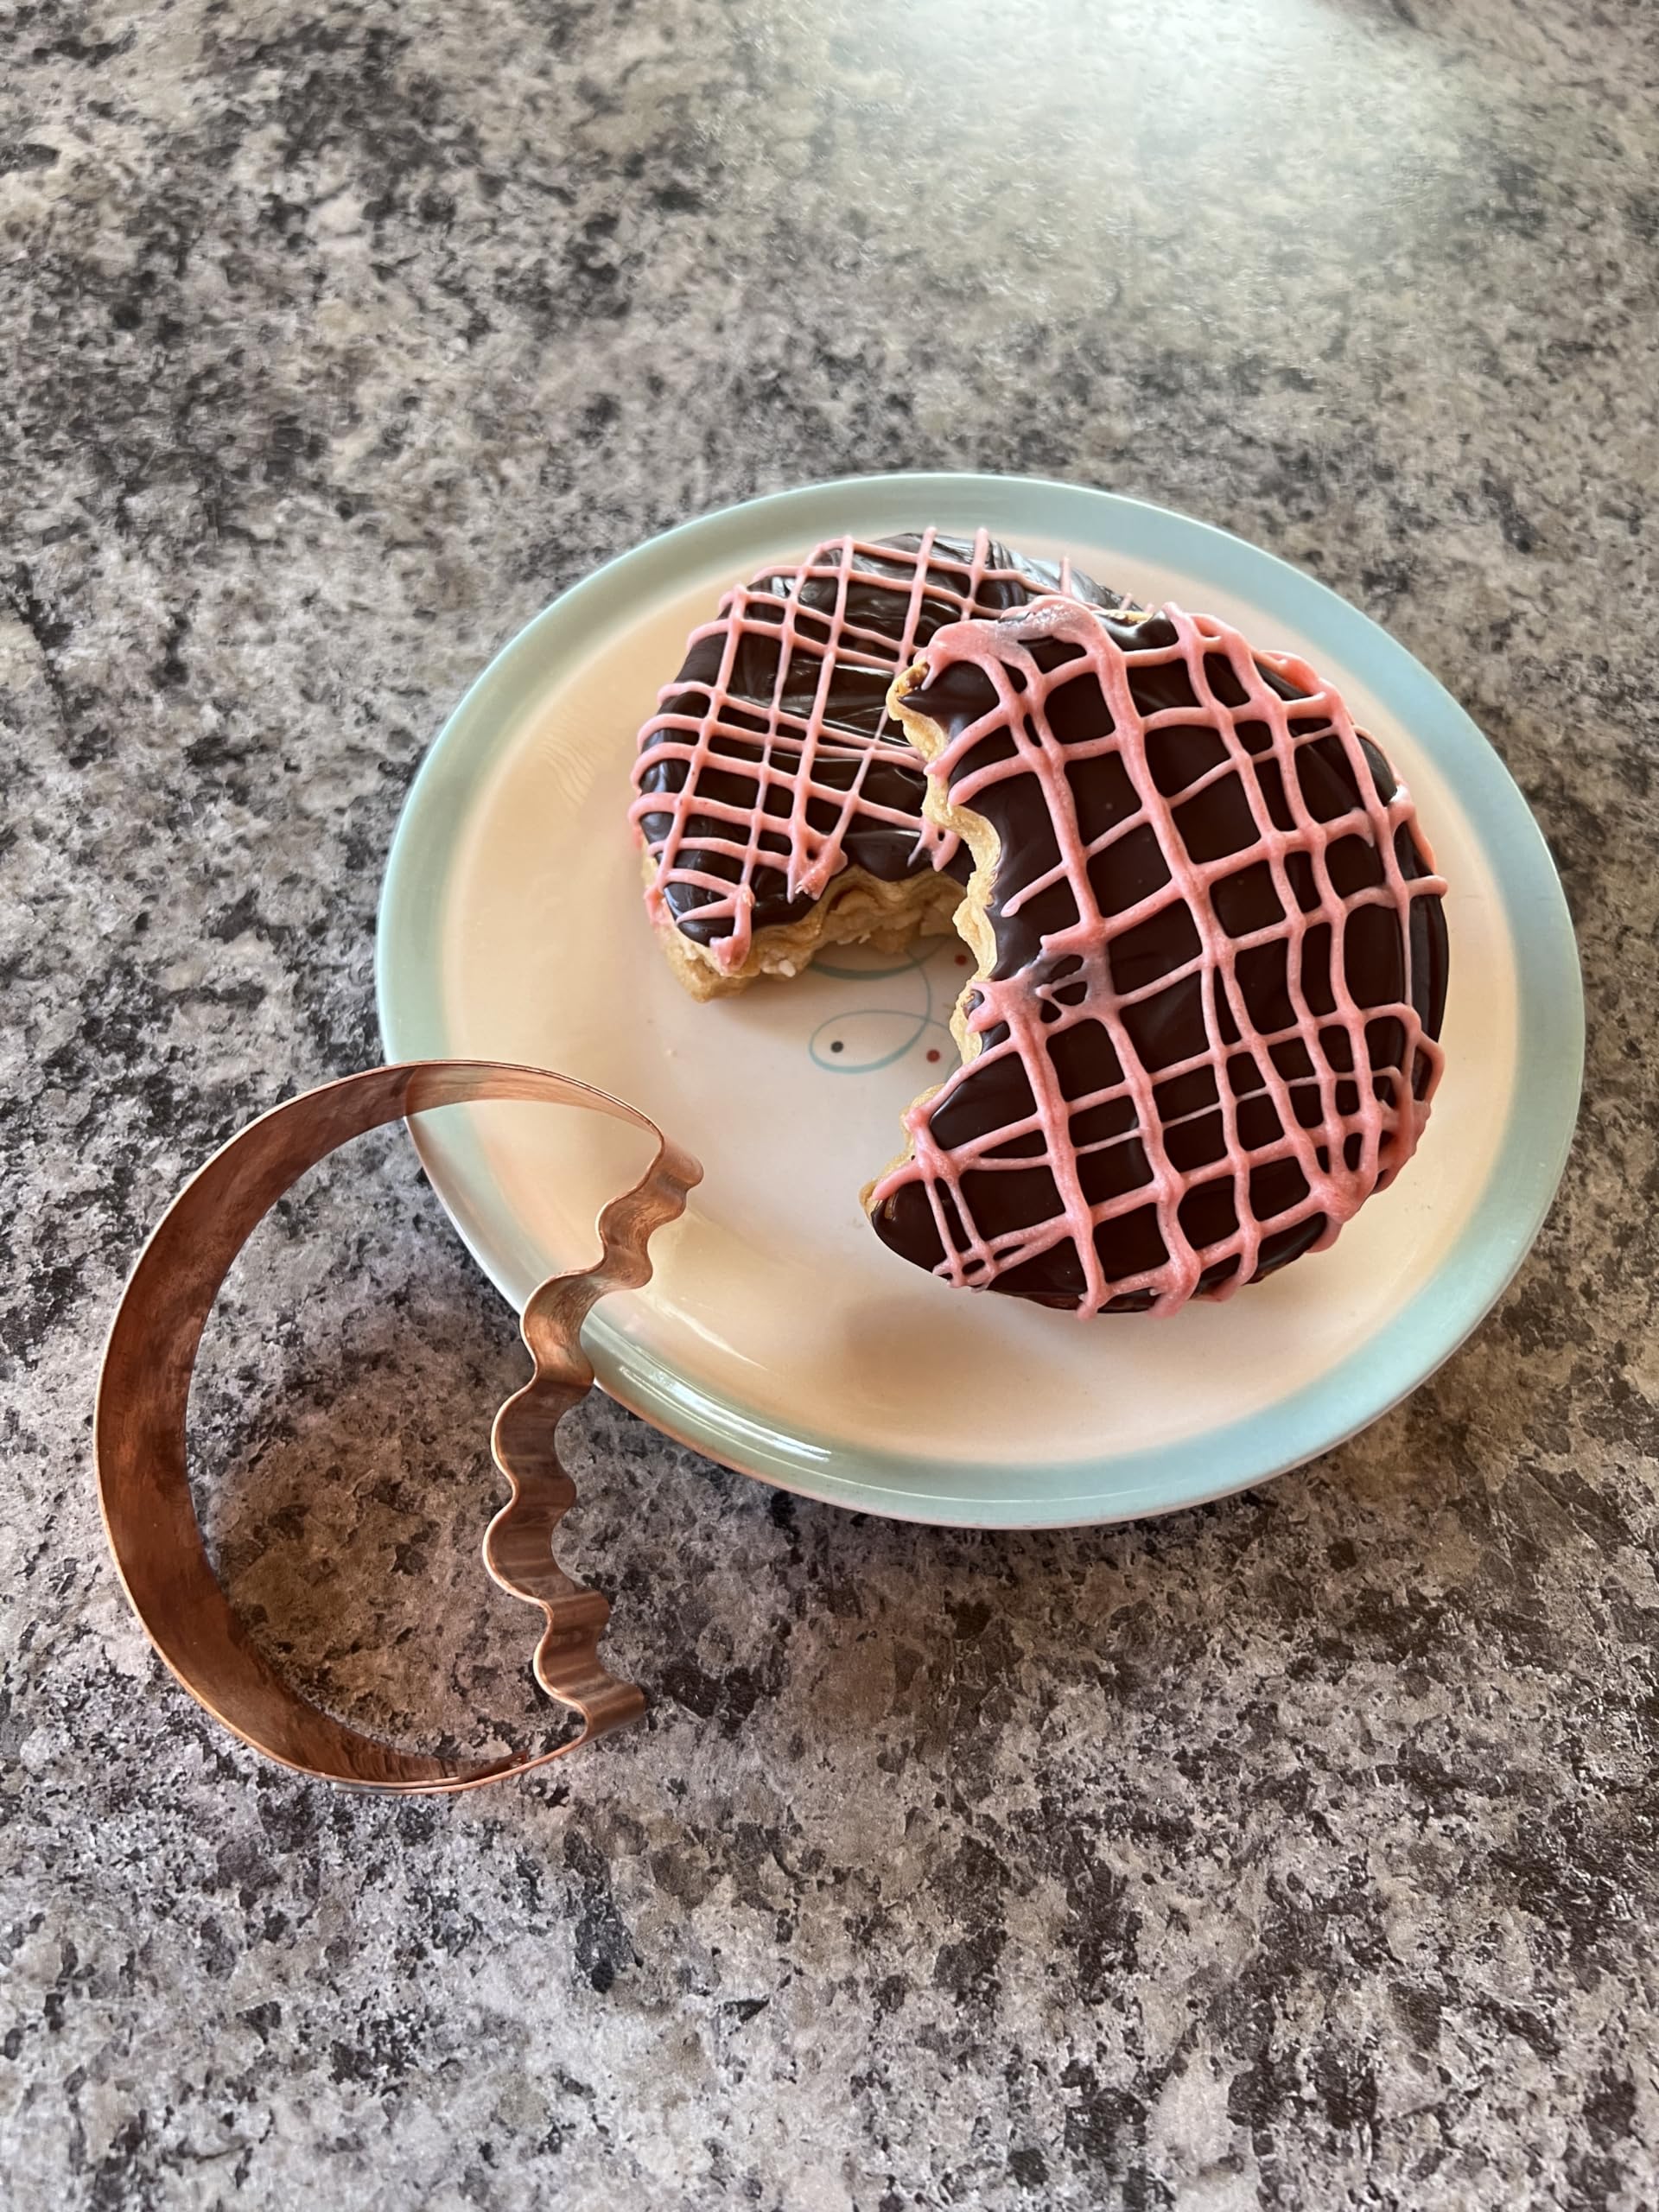 3 Inch Round Cookie Cutter with bite taken out - Handcrafted Copper Cookie Cutter by The Fussy Pup